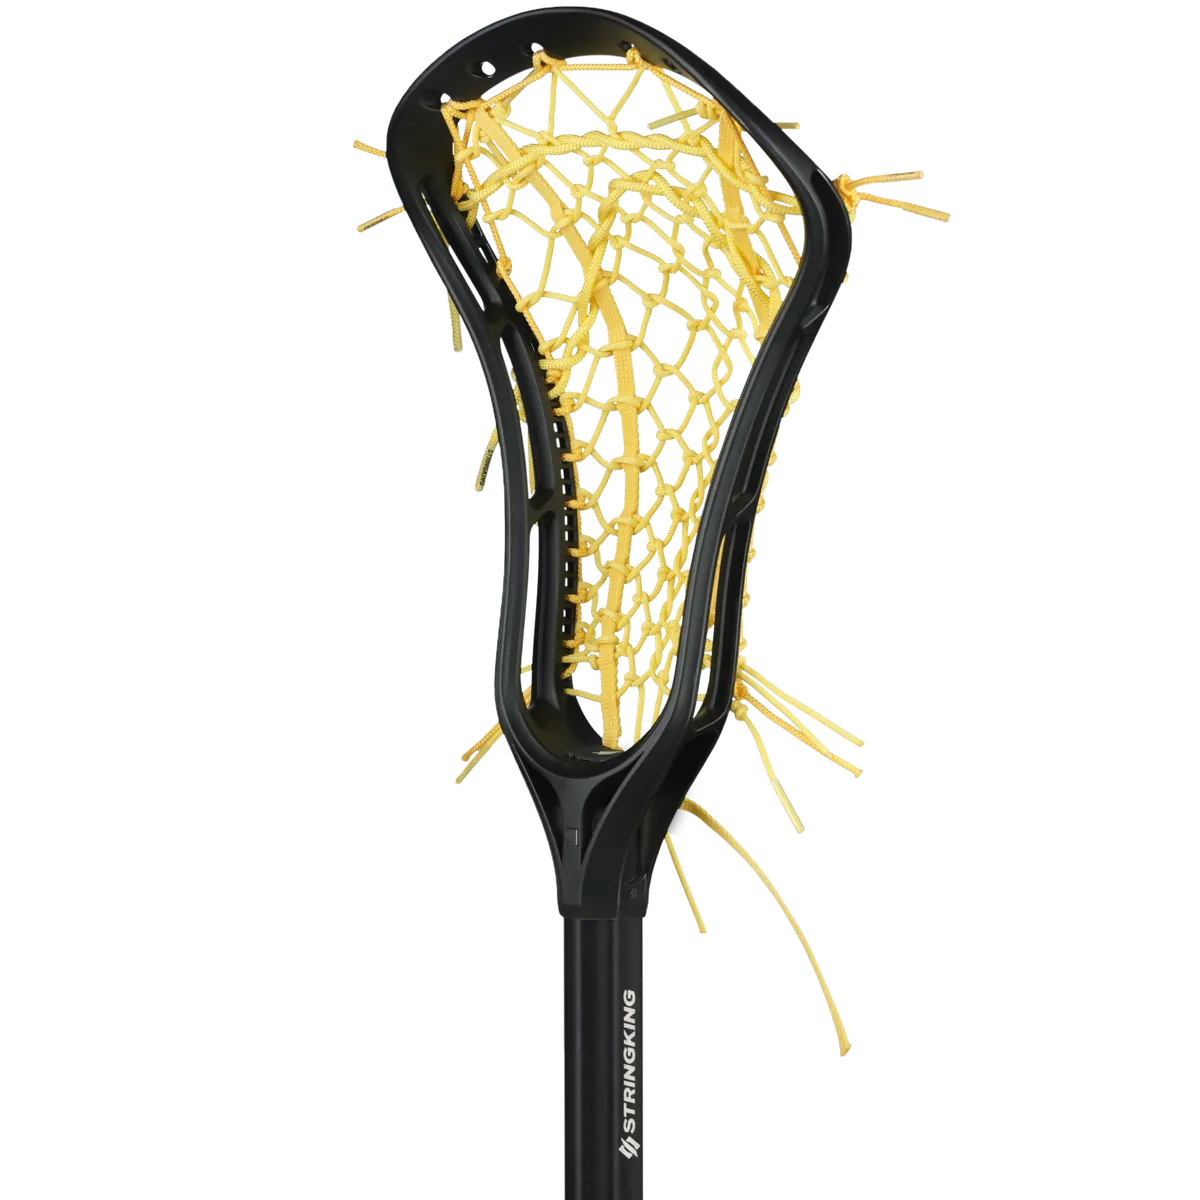 StringKing-Womens-Complete-Lacrosse-Stick-Tech-Trad-Mid-Pocket-Angle-Black-Yellow